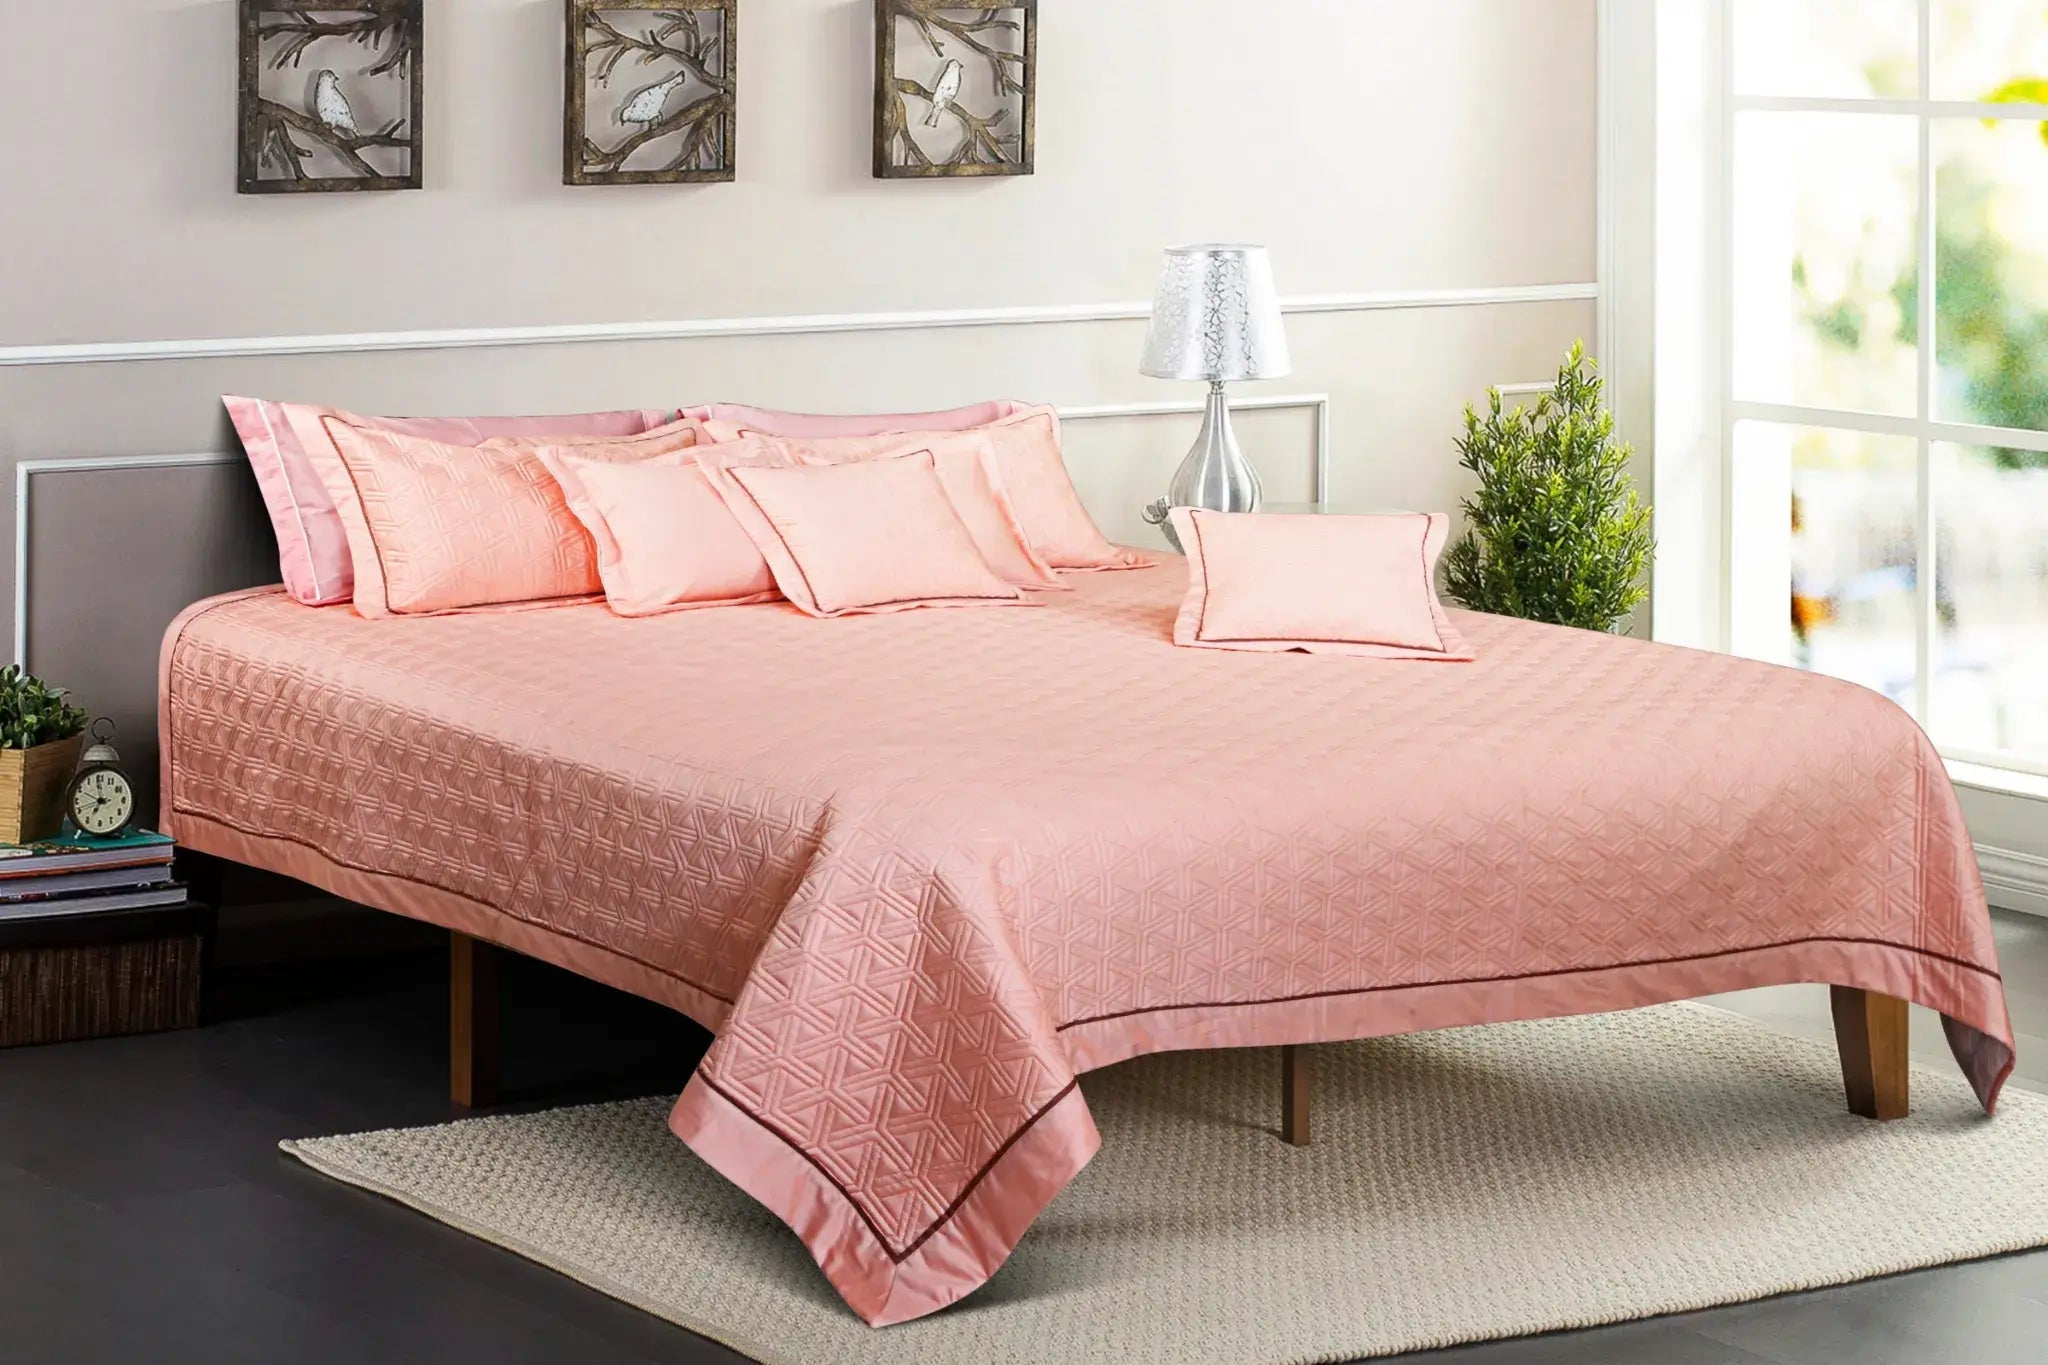 Malako Kairo 500 TC Peach Solid King Size 100% Cotton Quilted Bed Cover Set - MALAKO